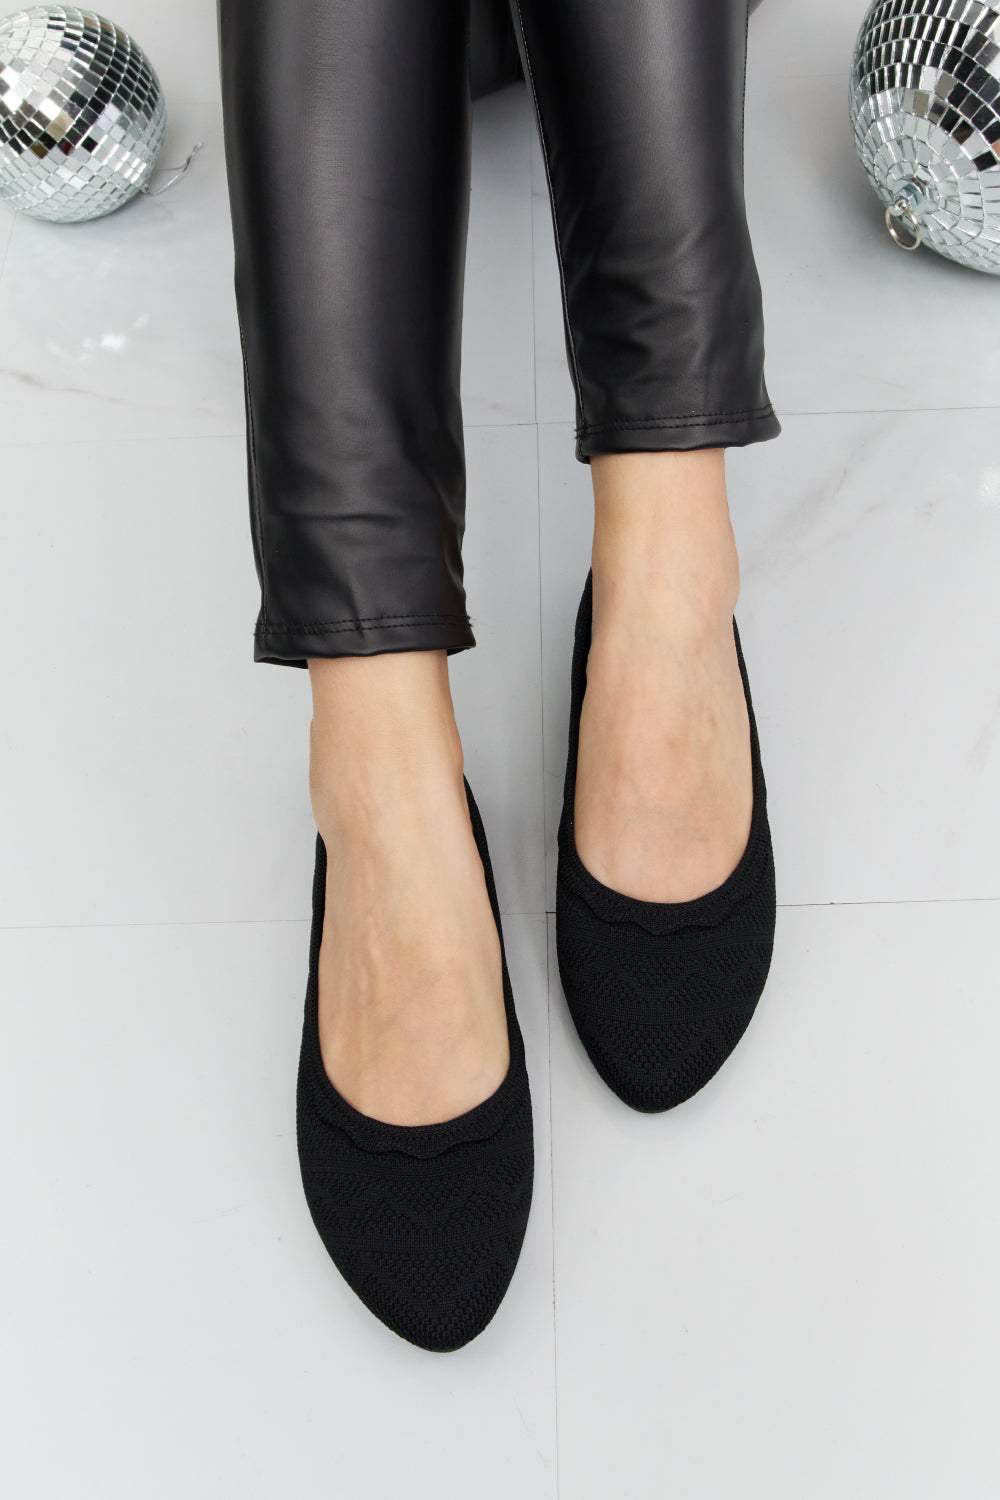 forever-link-scalloped-trim-flats